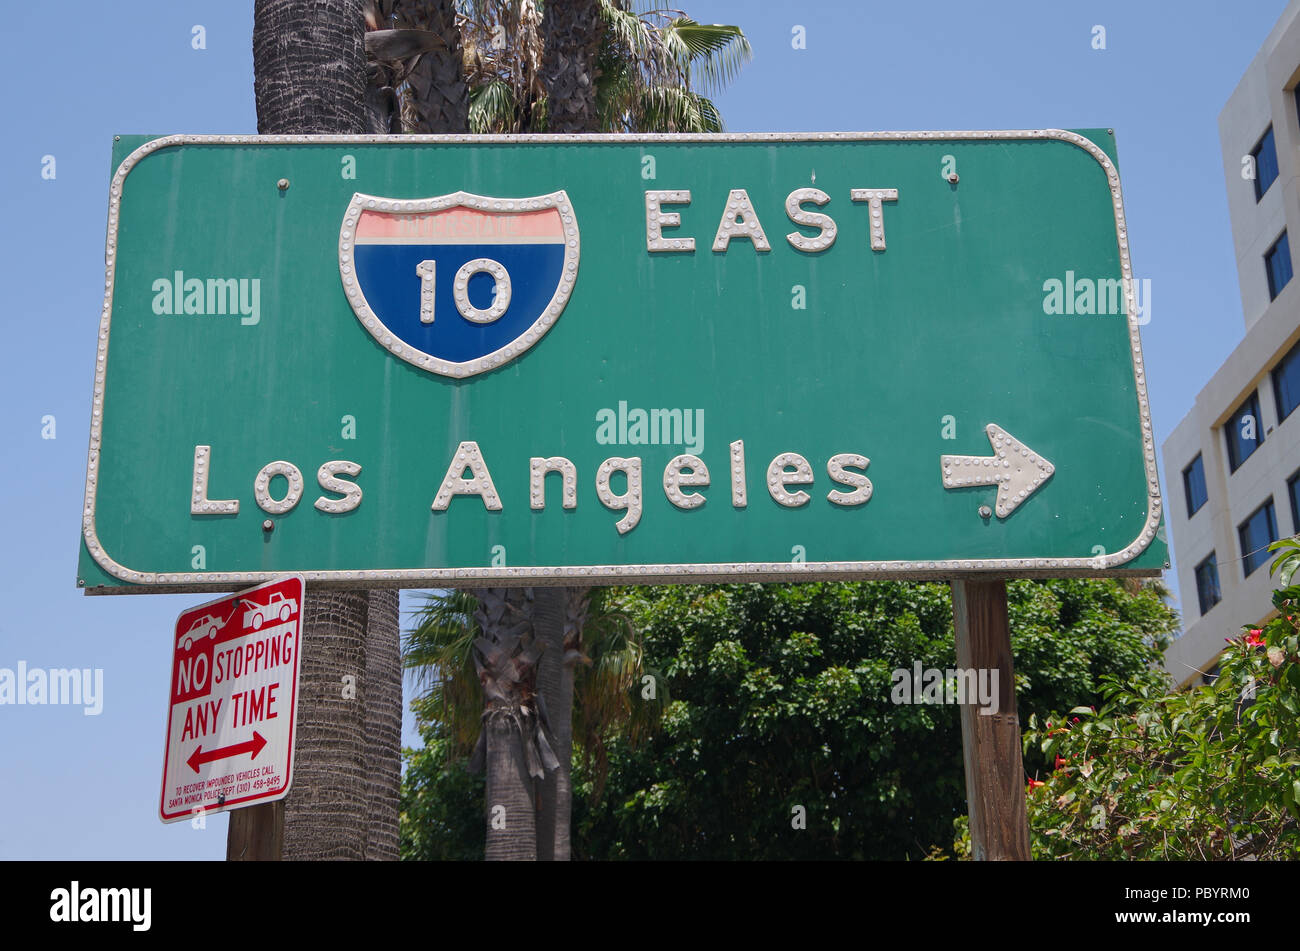 Los Angeles California l'Interstate 10 East sign Banque D'Images